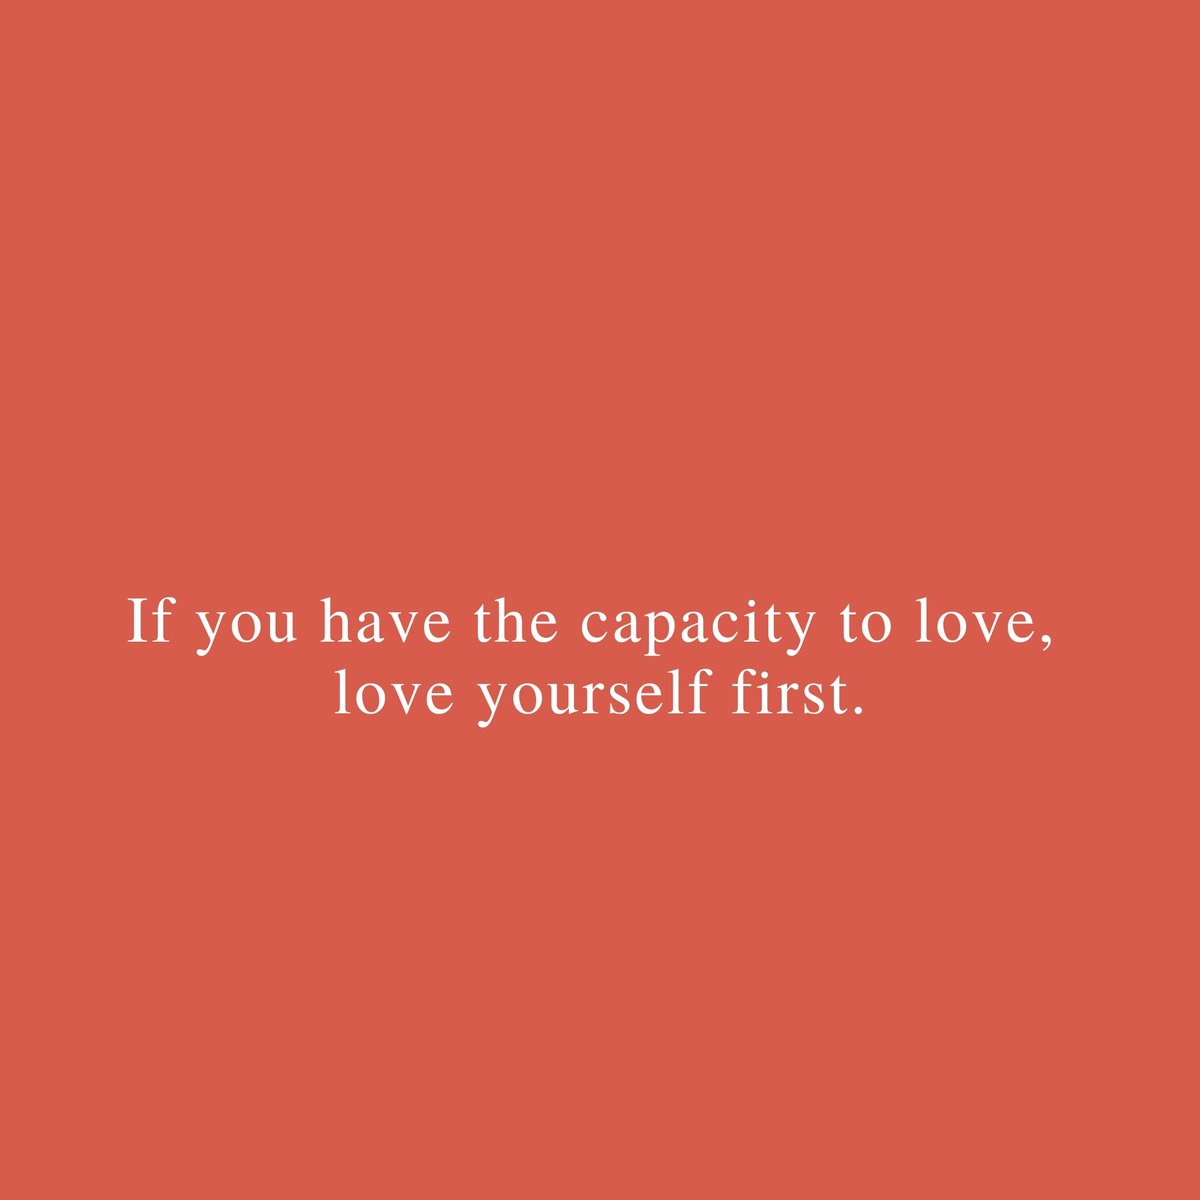 RT @wiseconnector: Before you can love others, you must love YOU. https://t.co/b8xwX5zdXi